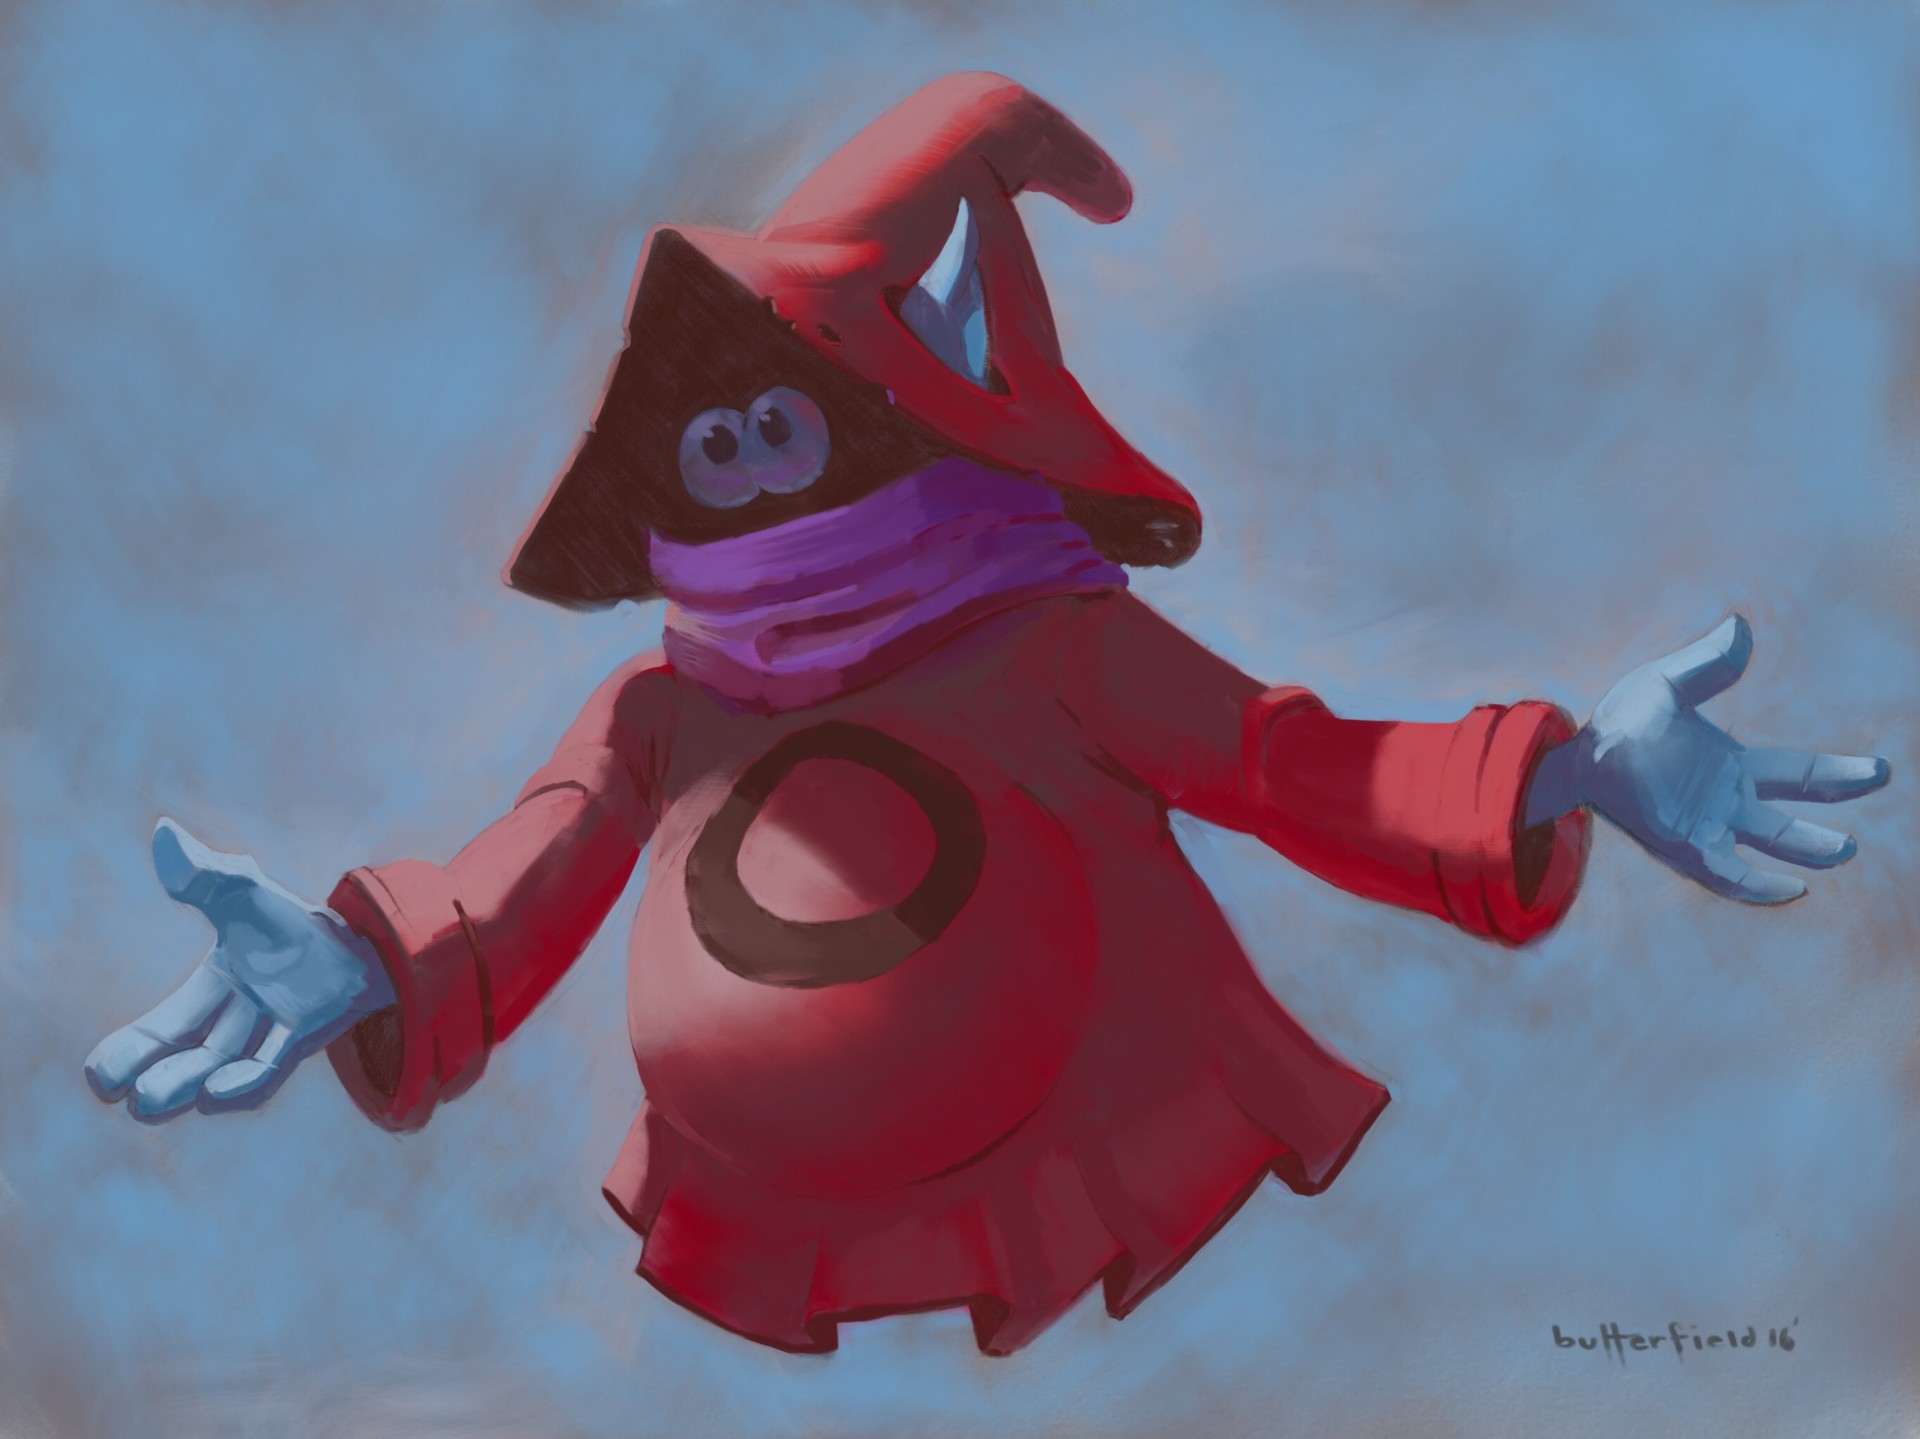 My kid wanted me to draw a picture of Orko so I looked up some reference an...